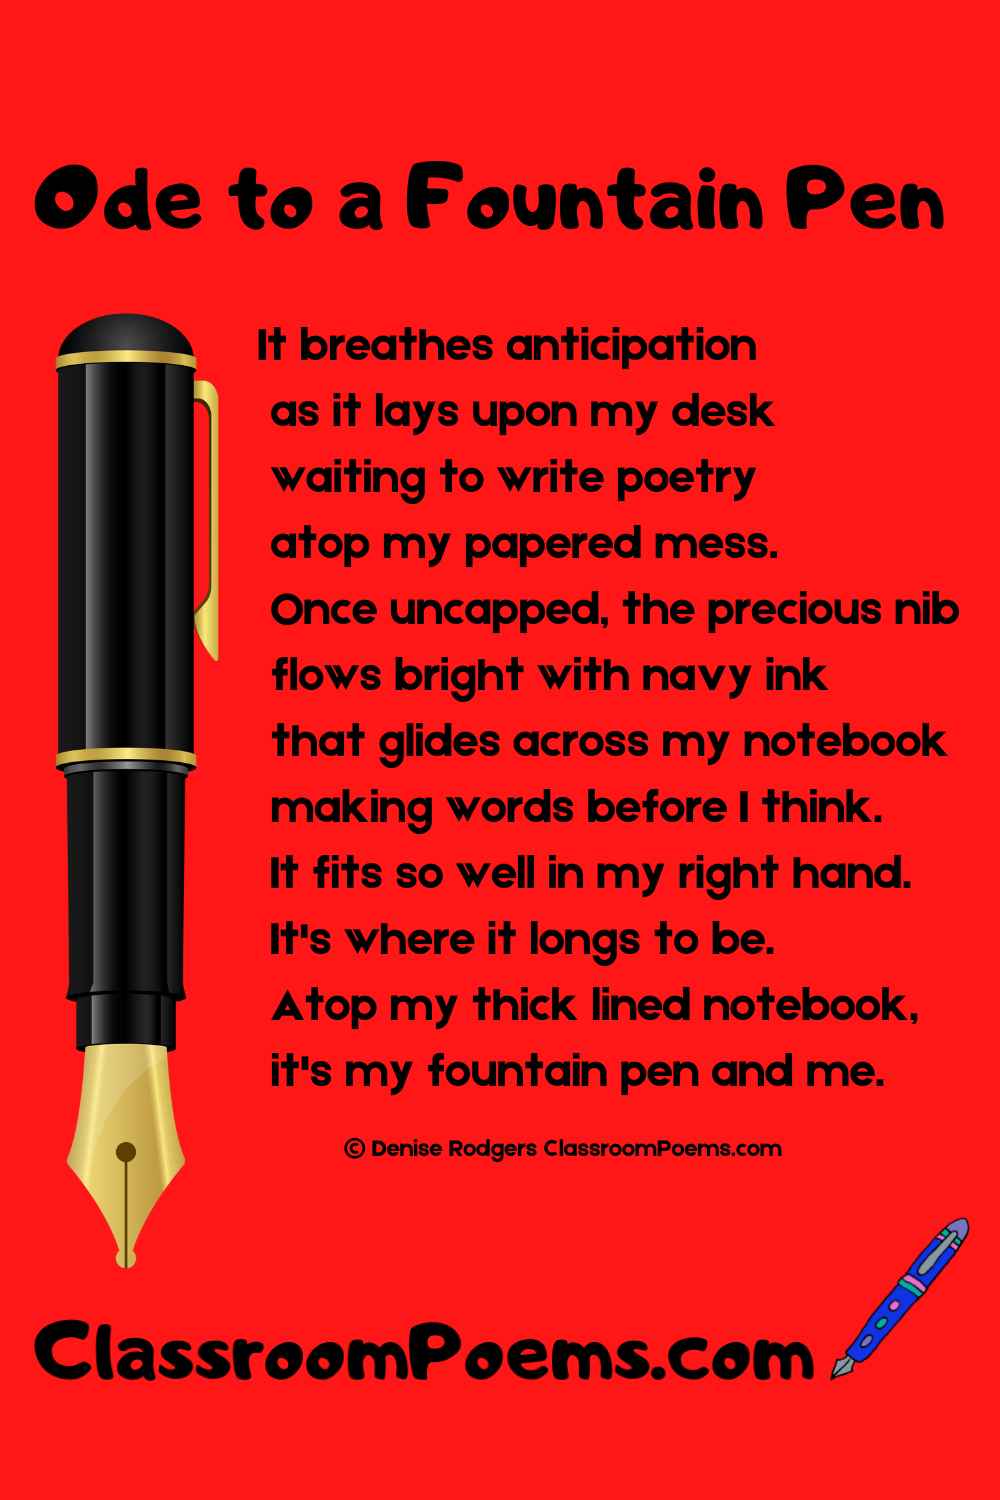 Ode to a Fountain Pen by Denise Rodgers on ClassroomPoems.com.